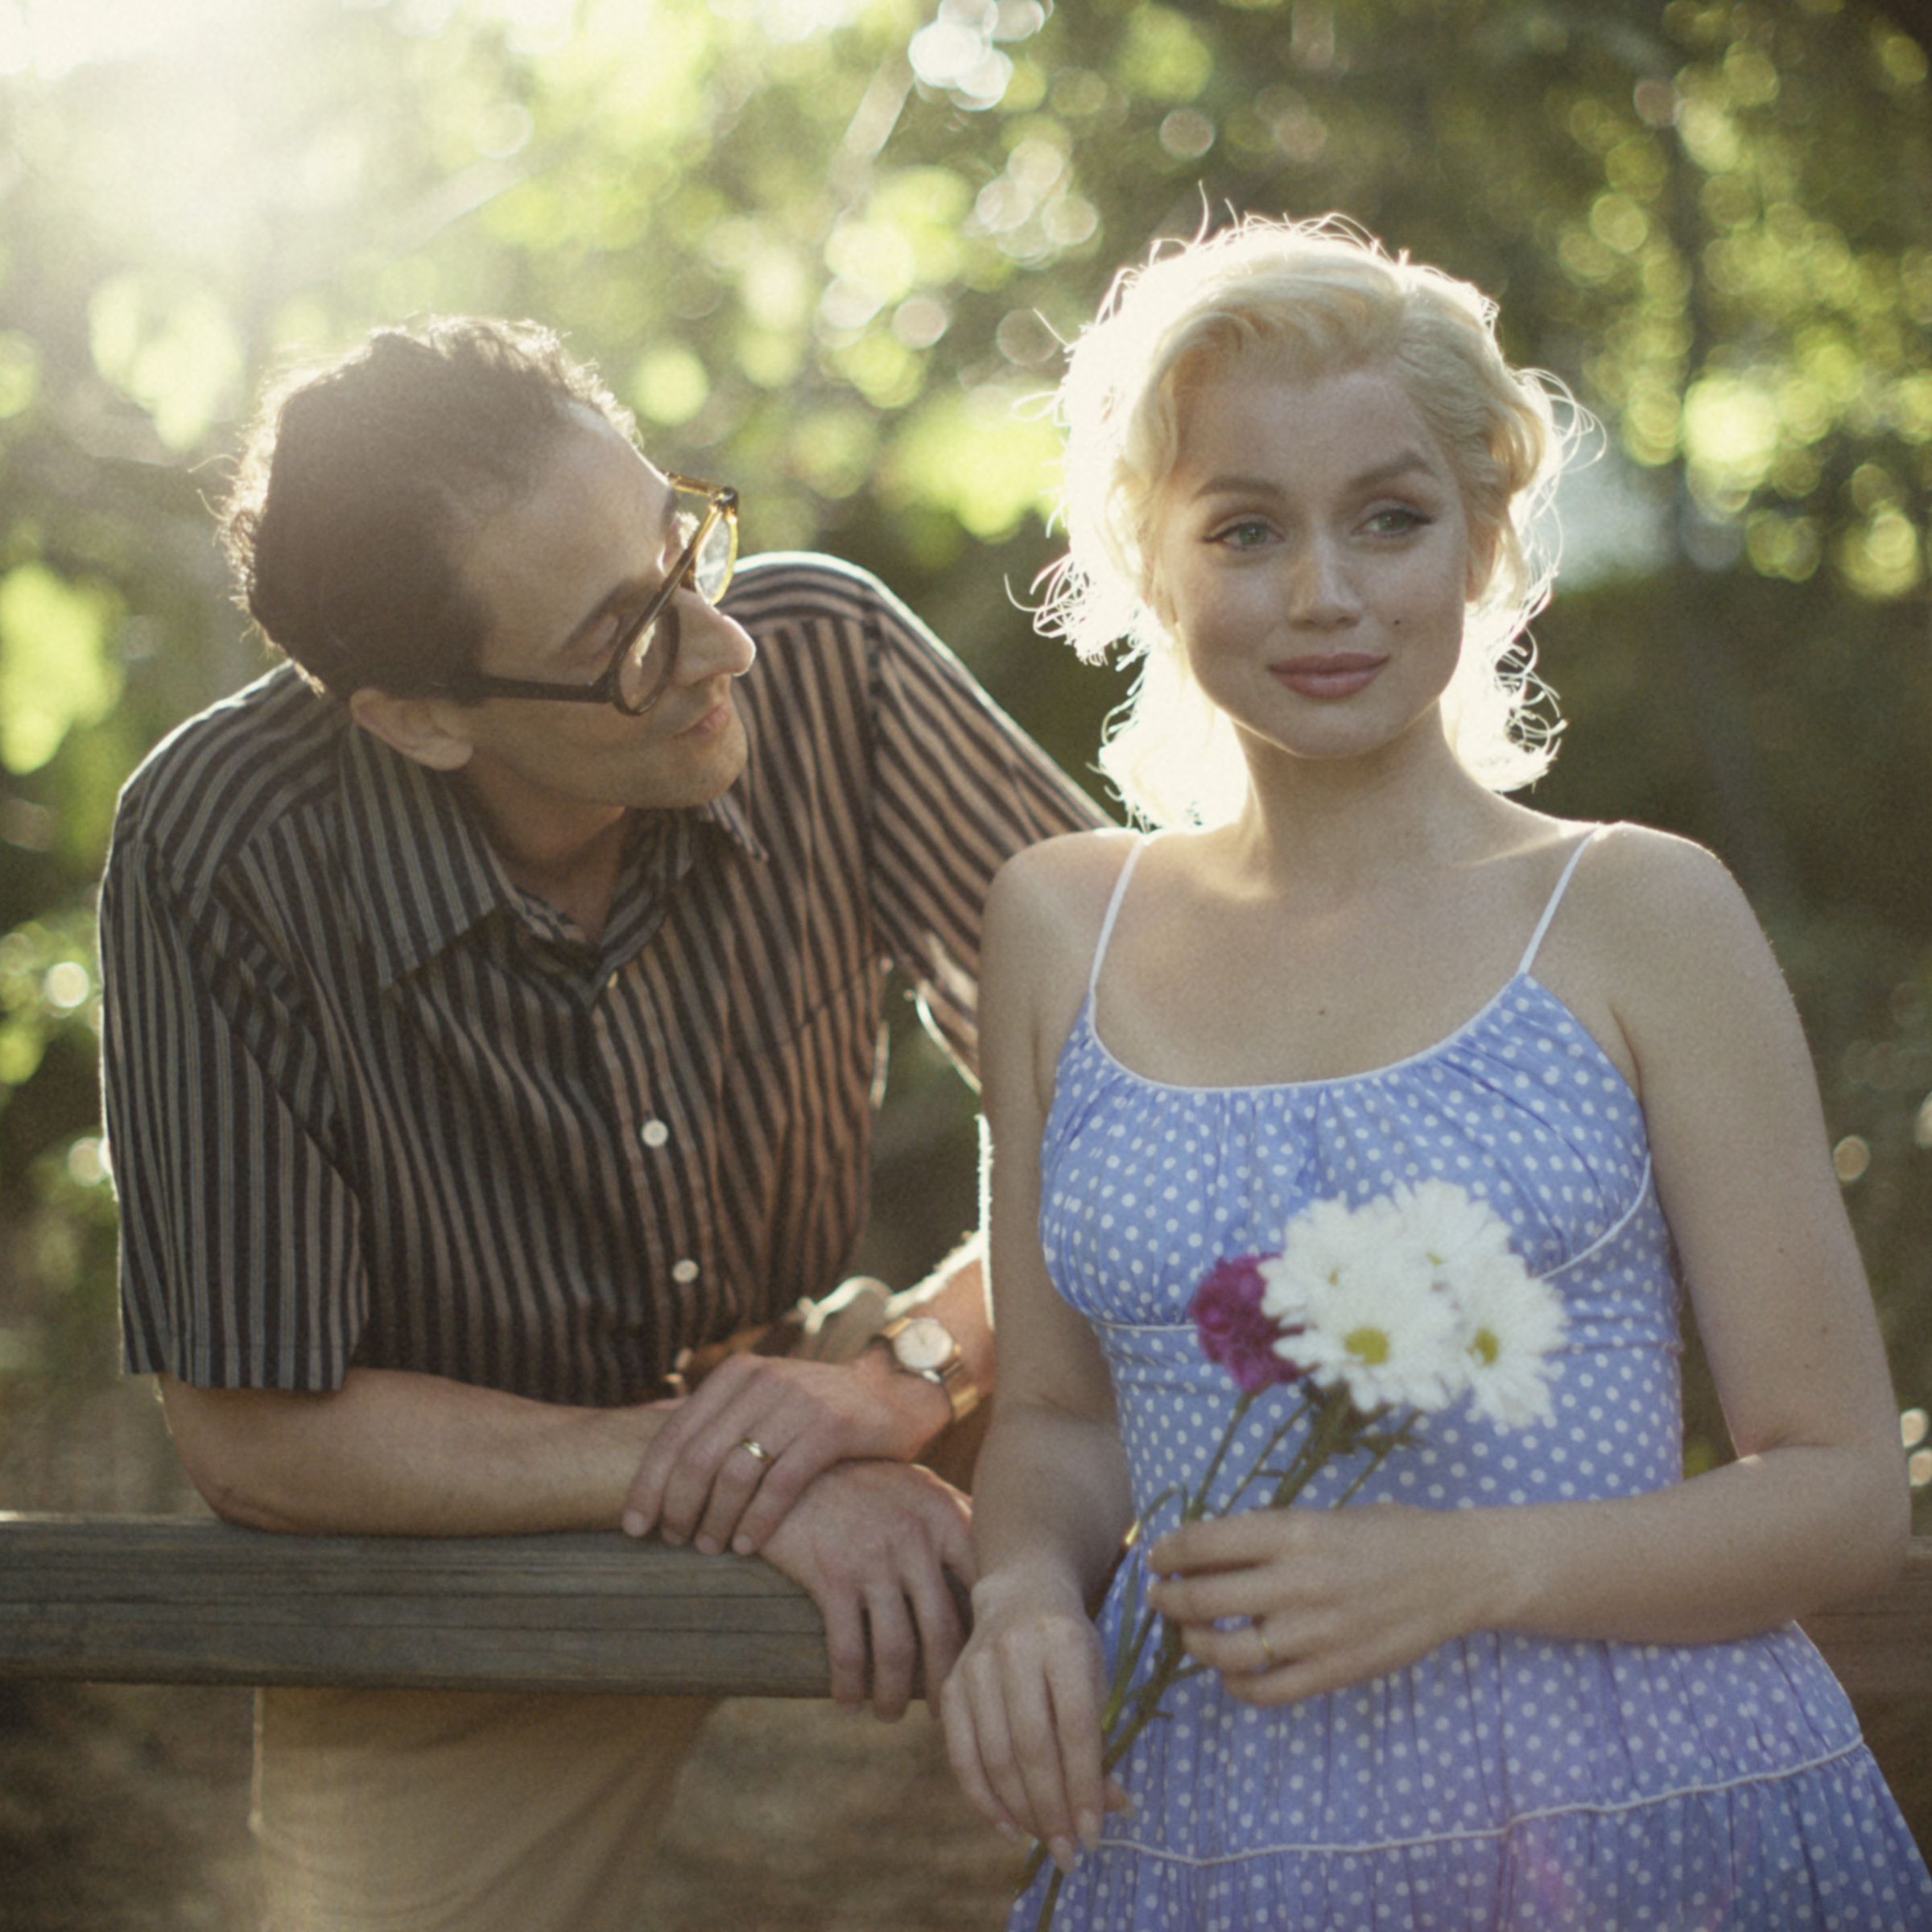 A bespectacled man leaning on a wooden fence as he gazes at a woman holding a bunch of flowers and smiling off into the distance.